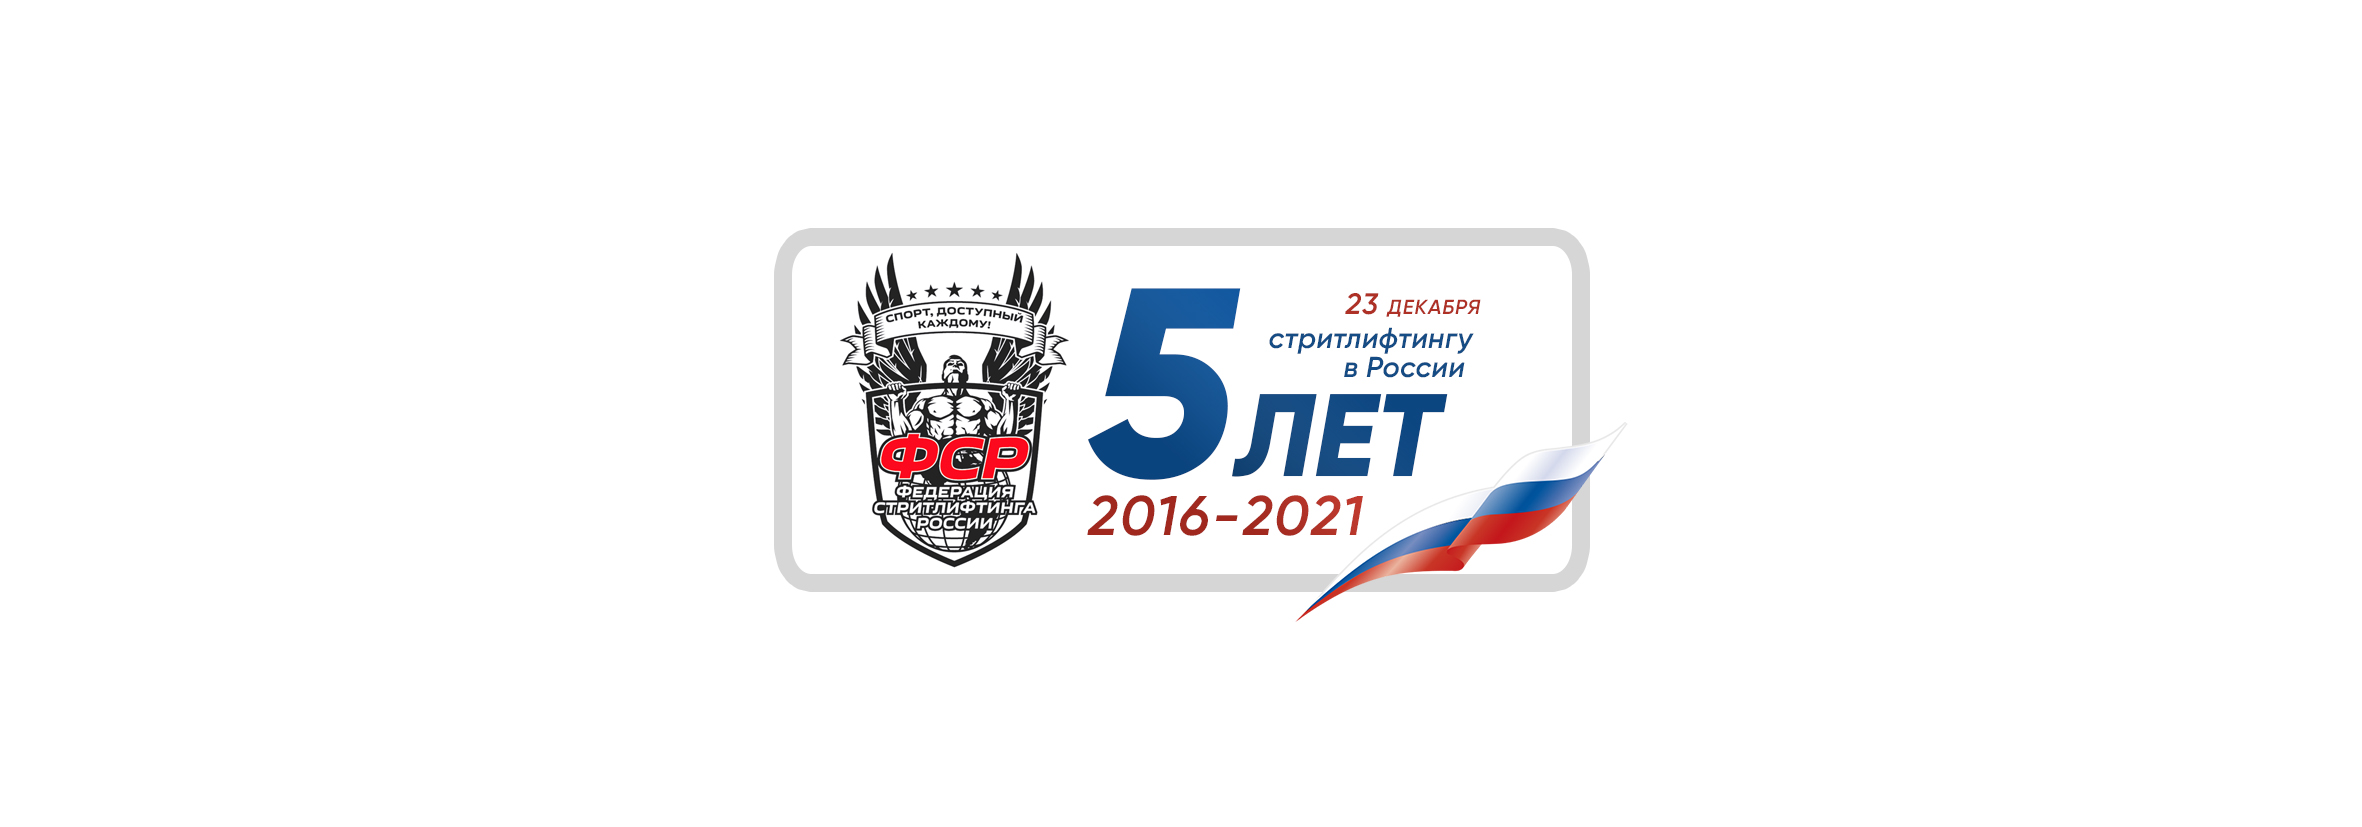 LOGO ANNOUNCEMENT | CELEBRATION OF THE 5TH ANNIVERSARY OF THE RUSSIAN STREETLIFTING FEDERATION